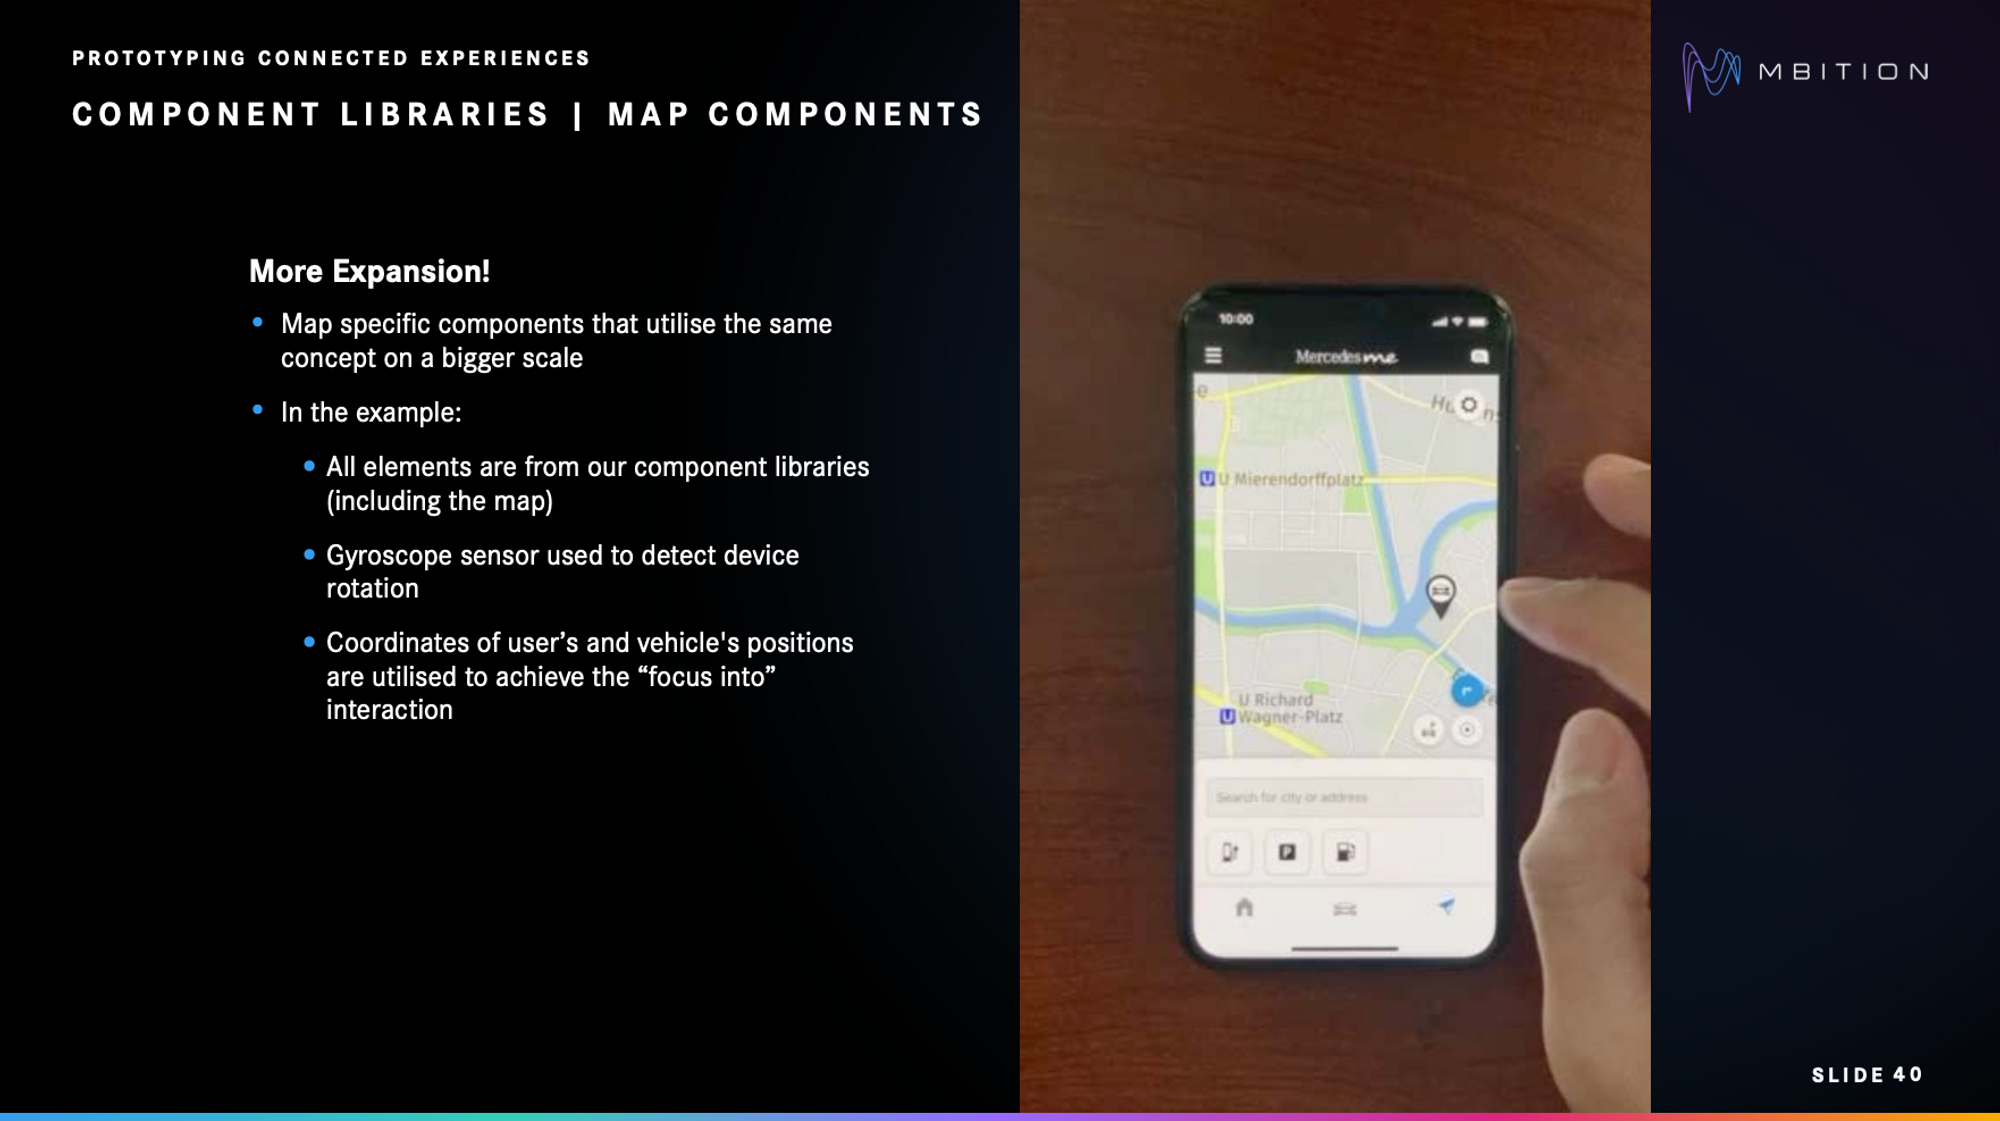 Example of map component used inside the Mercedes me App.